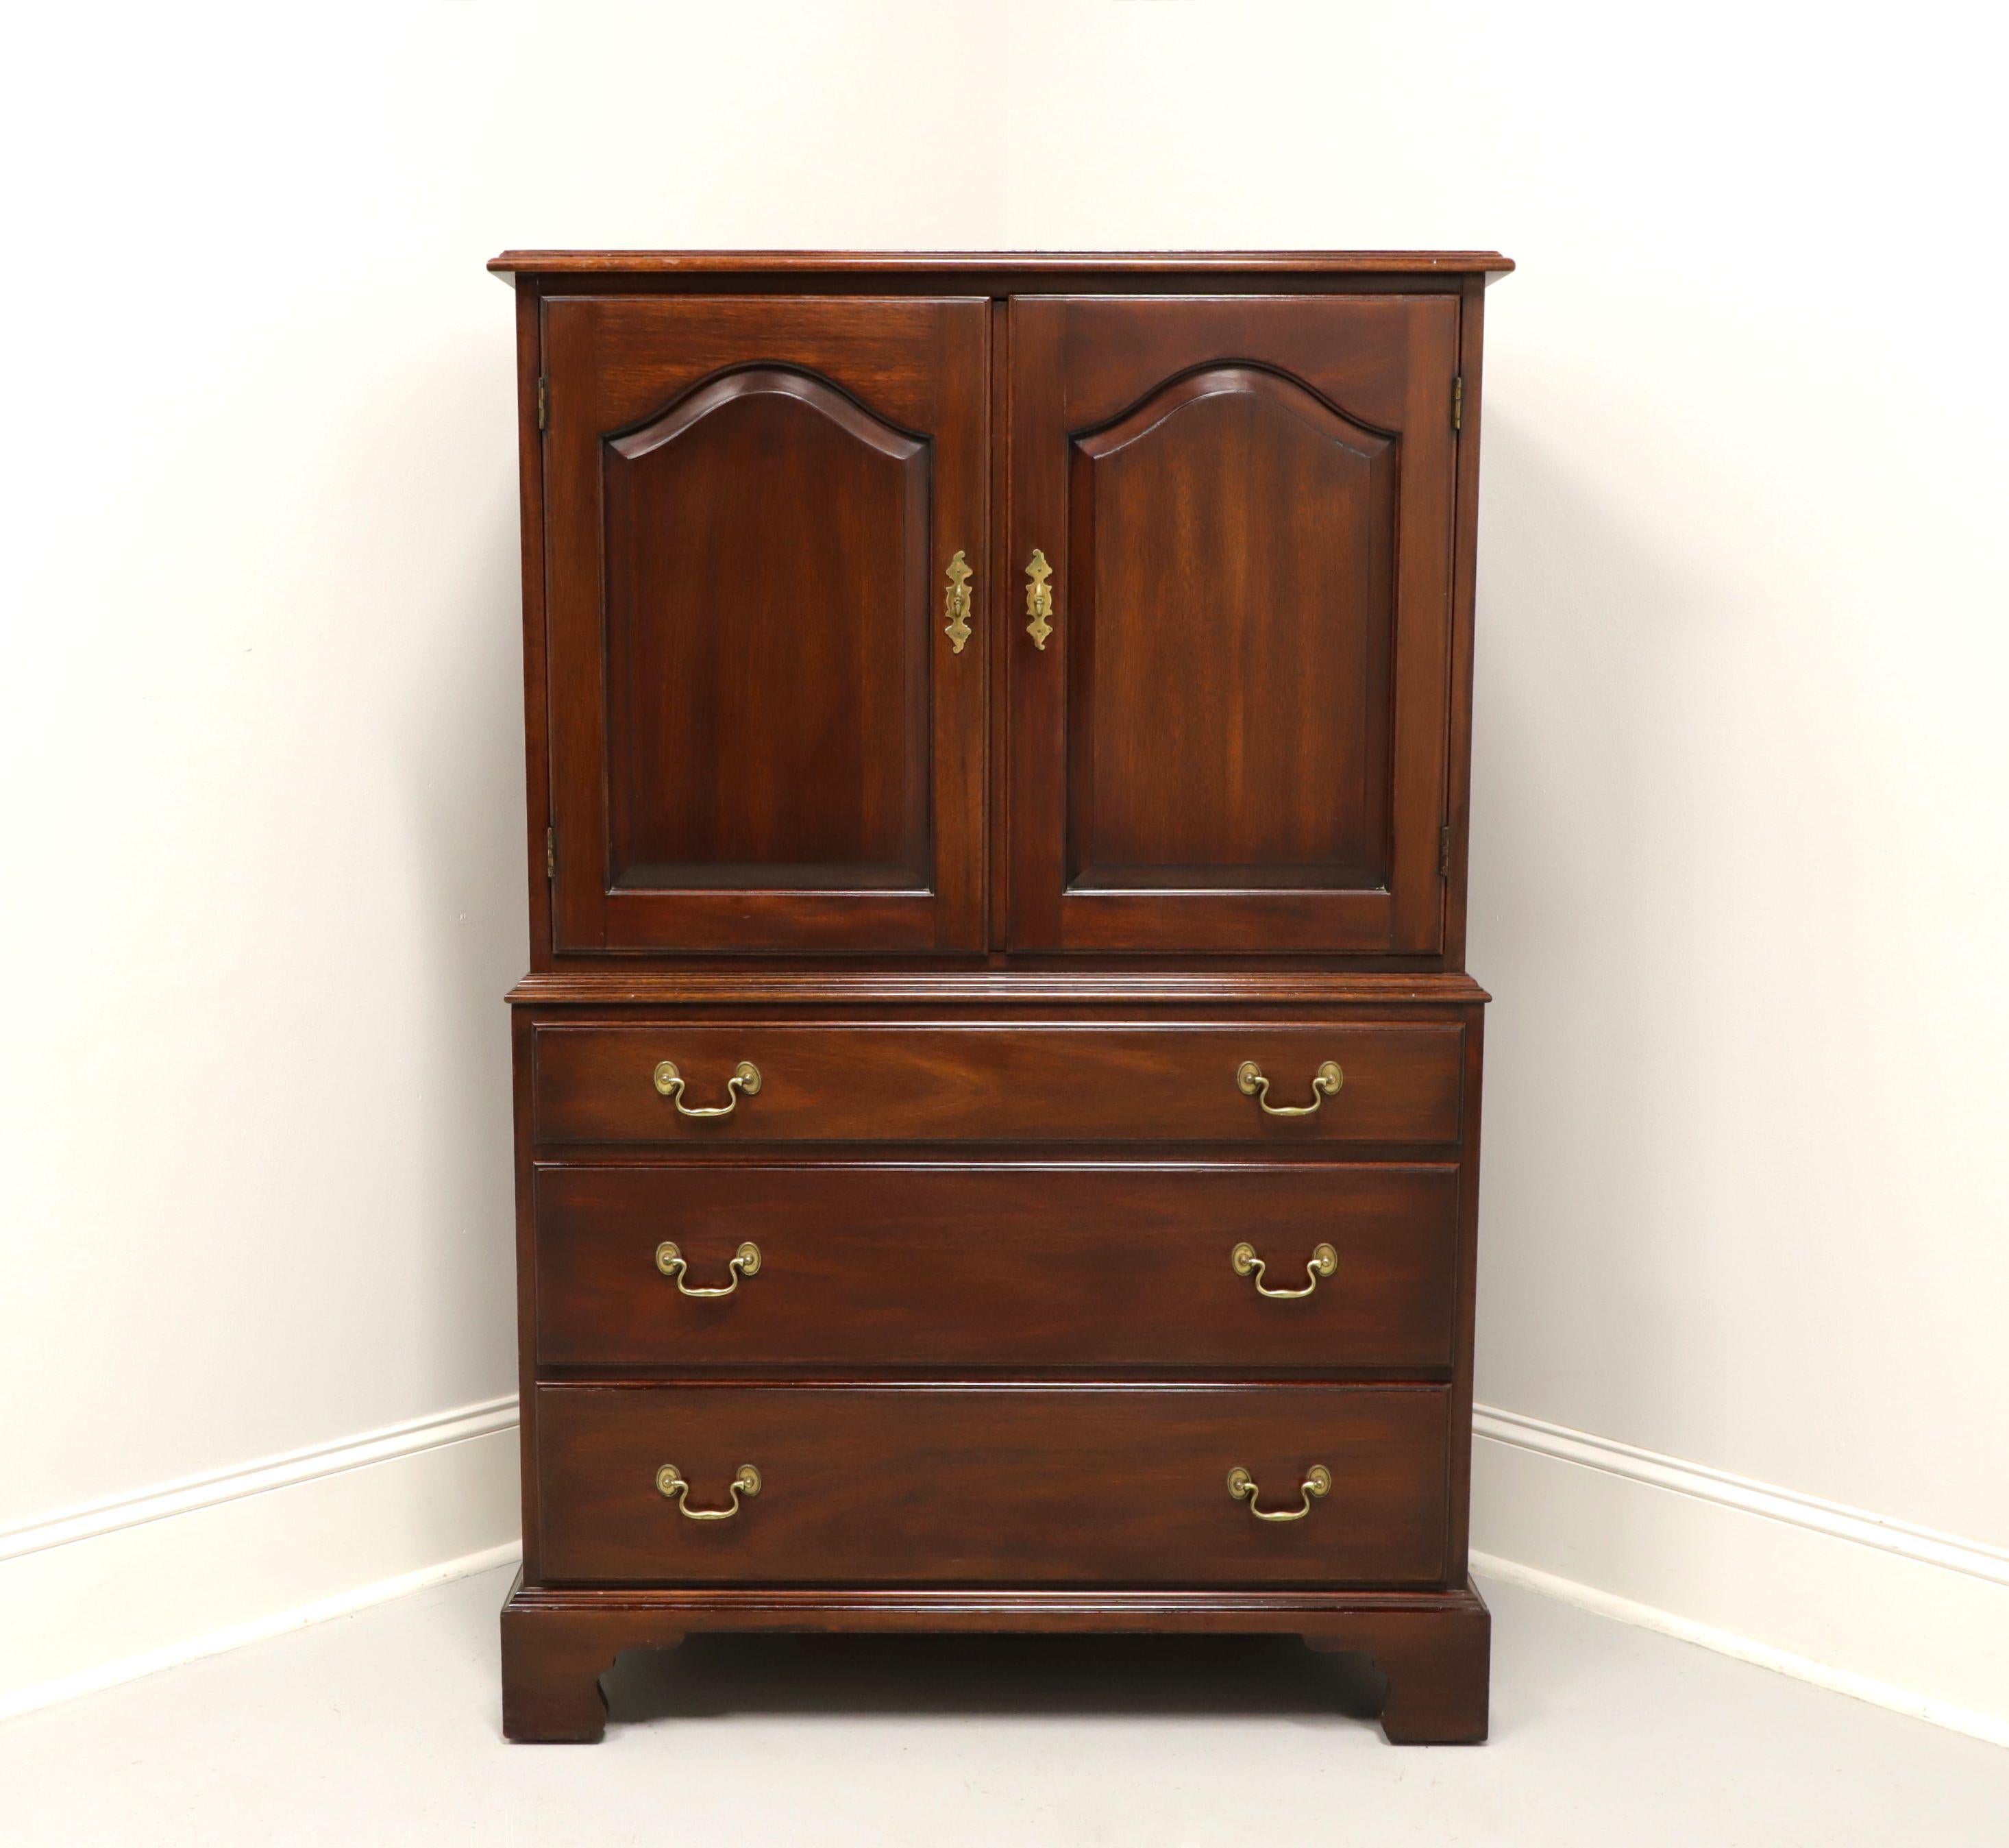 A Chippendale style gentleman's chest by Henkel Harris, of Winchester, Virginia, USA. Solid mahogany with brass hardware and bracket feet. Upper cabinet features double doors revealing six cubbies and one dovetail drawer with two fixed dividers.